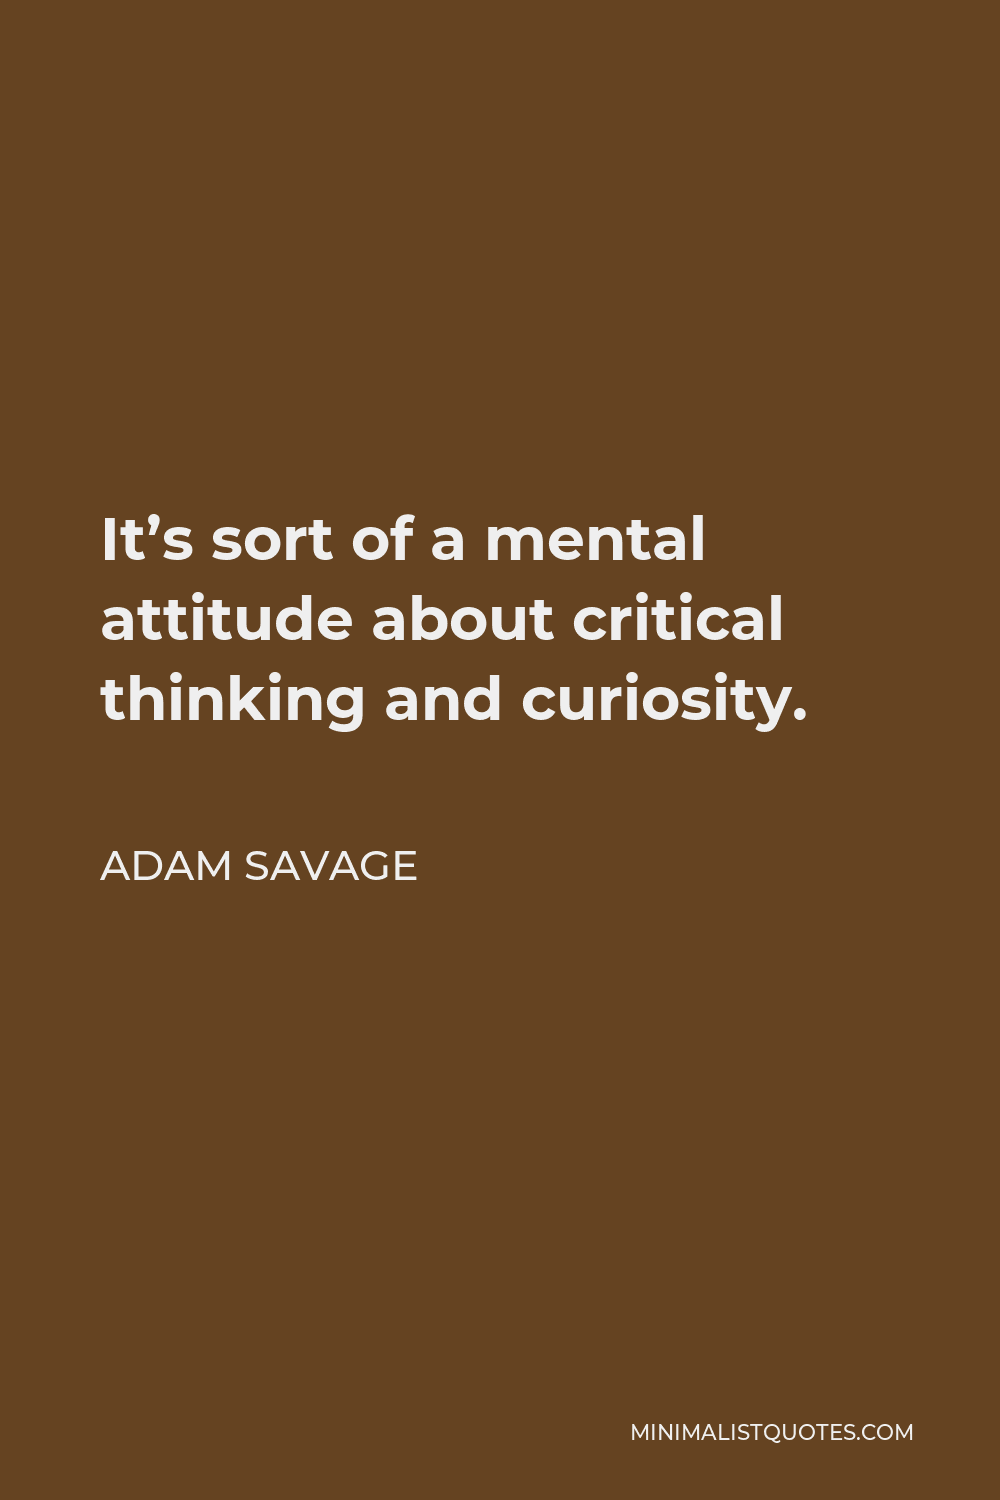 Adam Savage Quote - It’s sort of a mental attitude about critical thinking and curiosity.